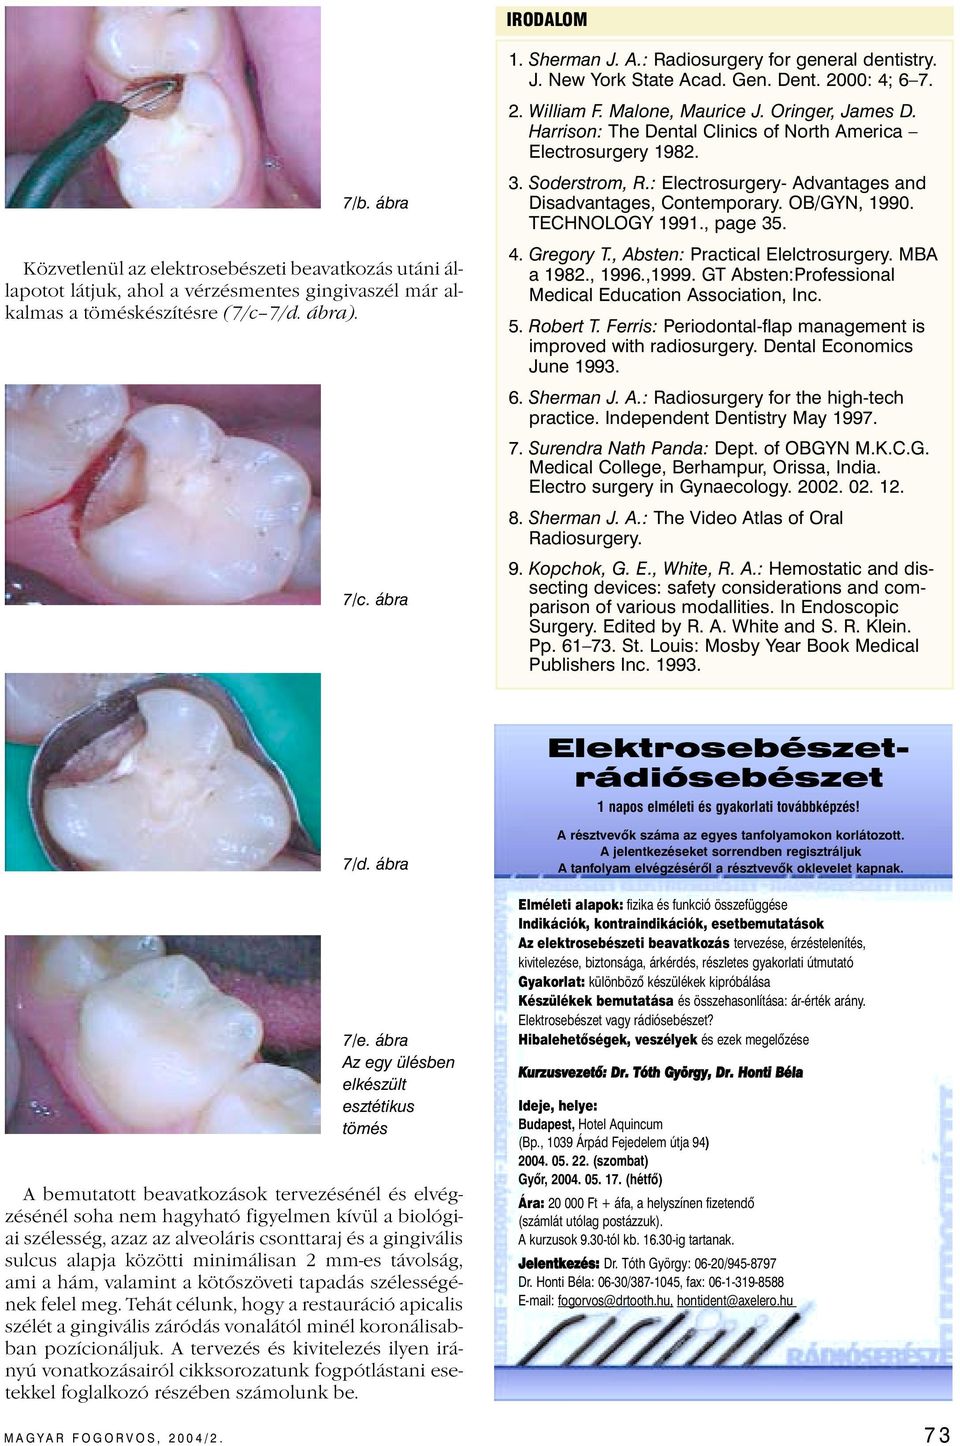 Harrison: The Dental Clinics of North America Electrosurgery 1982. 3. Soderstrom, R.: Electrosurgery- Advantages and Disadvantages, Contemporary. OB/GYN, 1990. TECHNOLOGY 1991., page 35. 4. Gregory T.